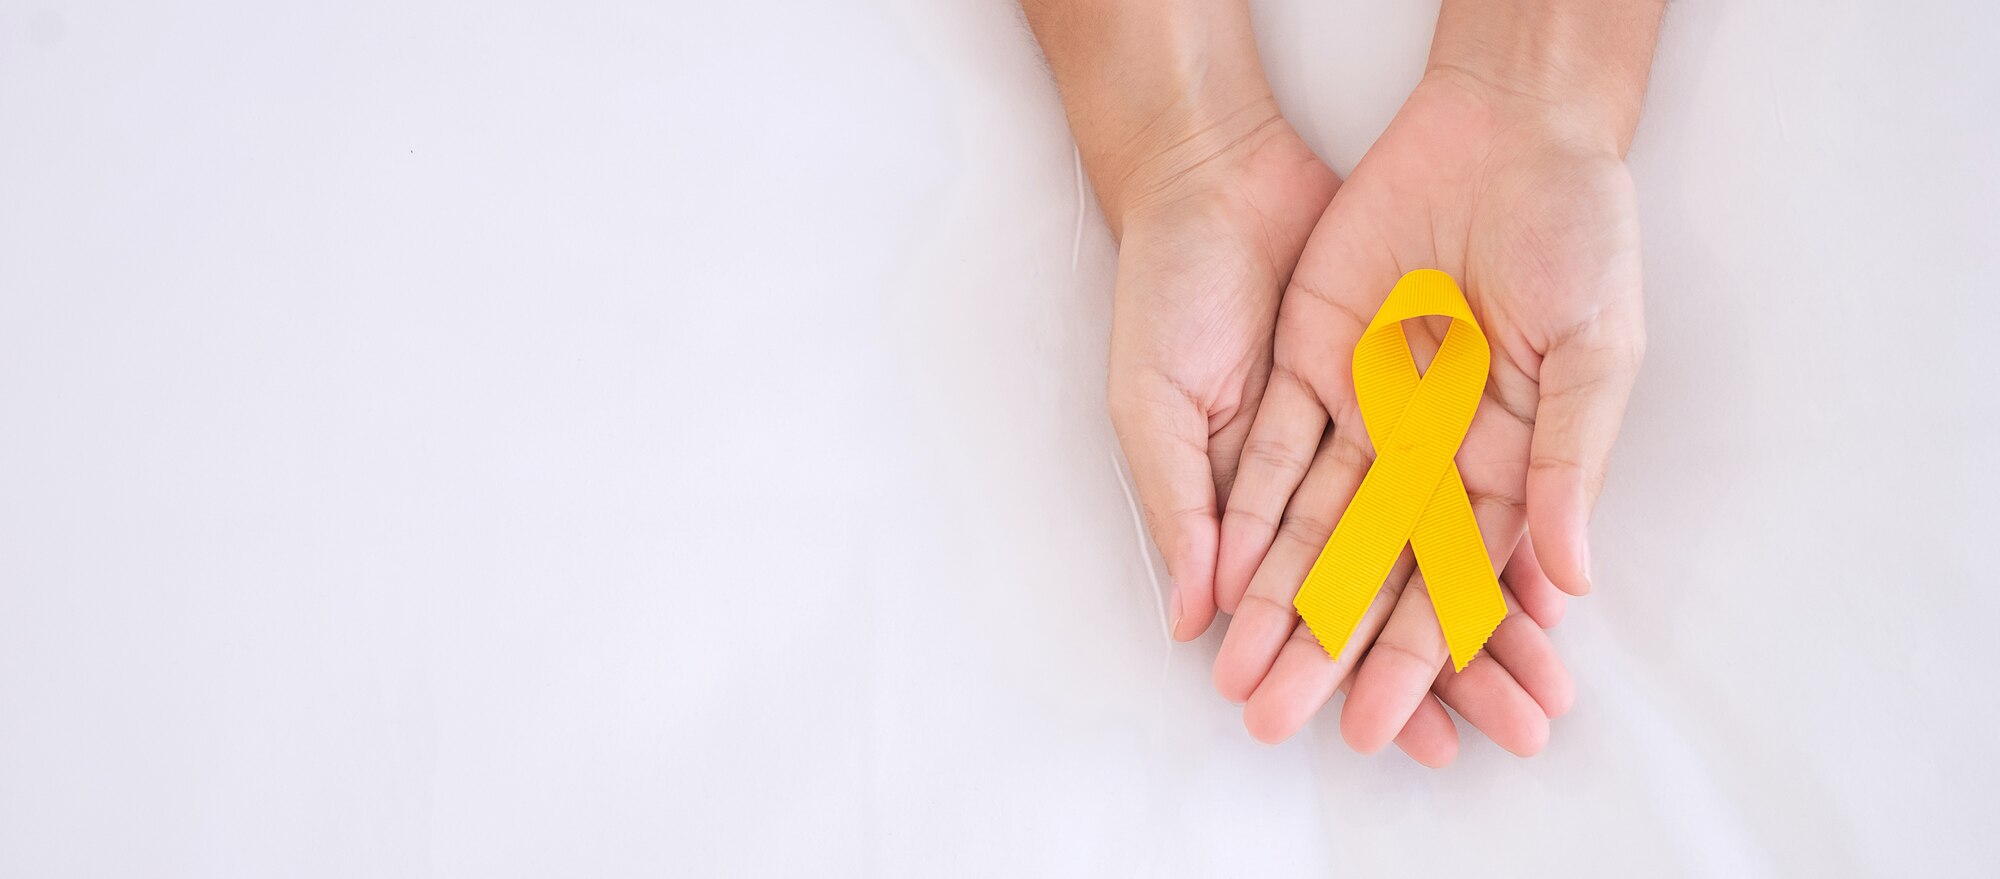 Hands holding a yellow ribbon to signify suicide prevention.